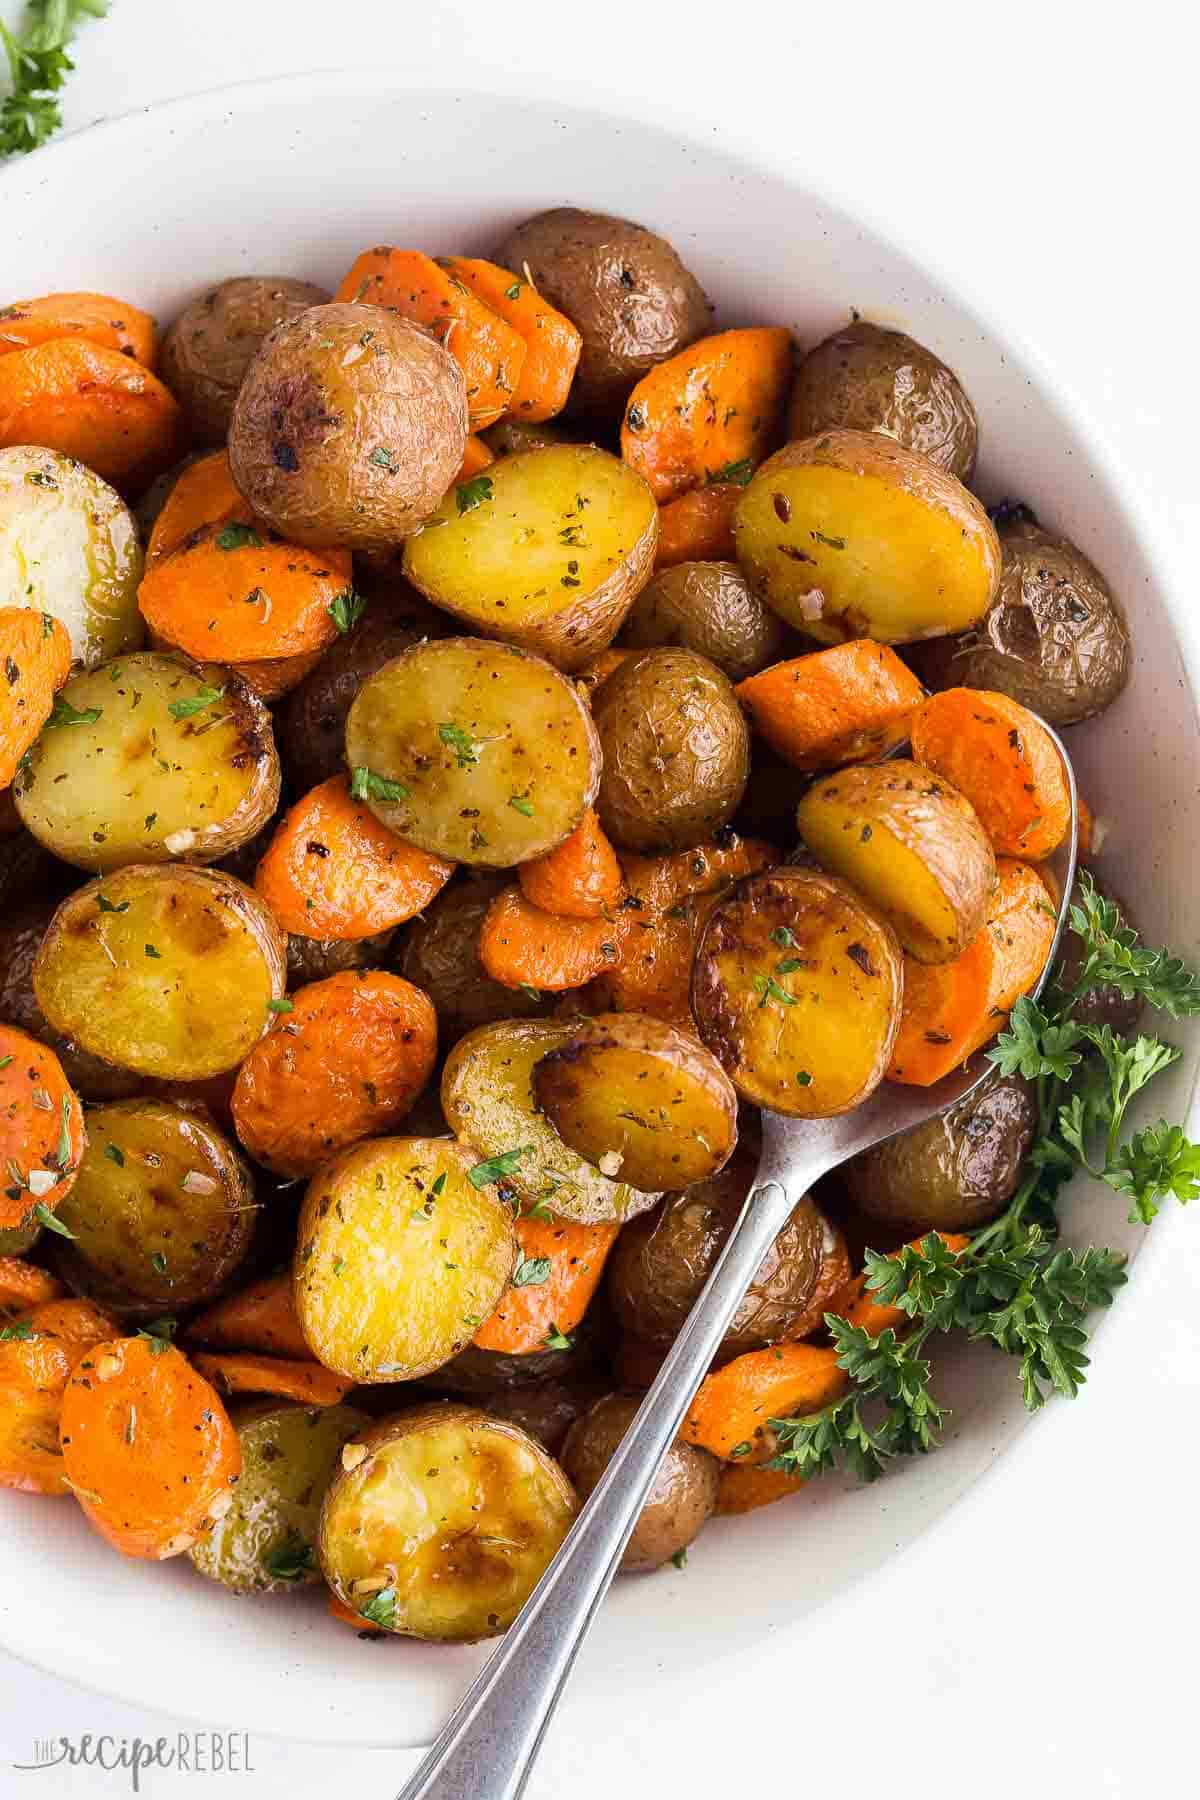 close up image of roasted potatoes and carrots in a white bowl with a spoon.